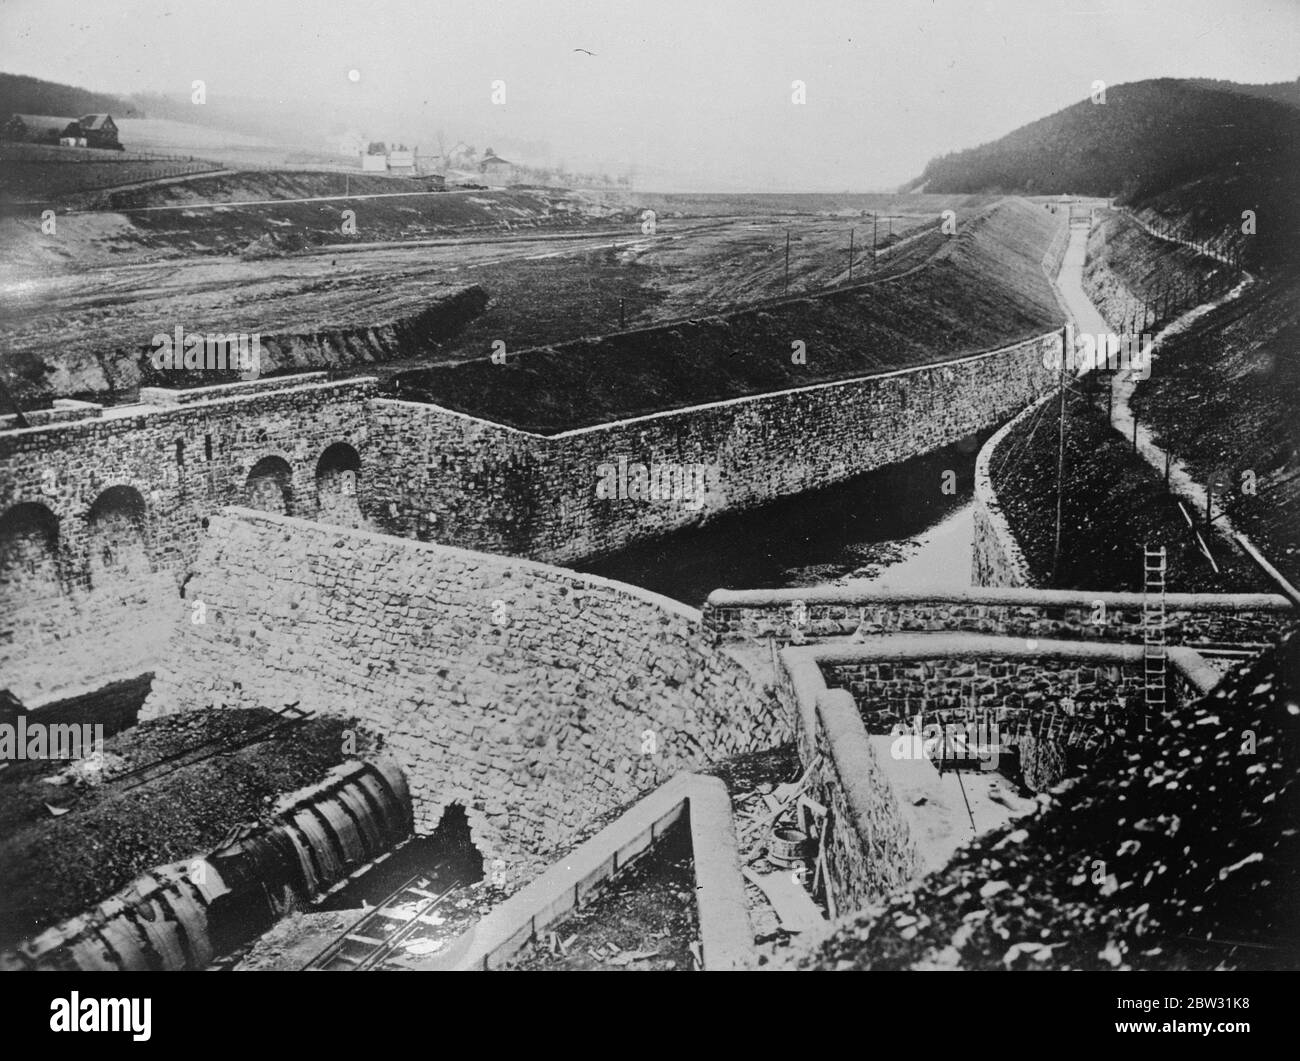 Germany building the world 's largest dam . Work on what is going to be the world 's largest artificial dam is in progress in the Surpo Valley in Westphalia . The wall of the dam will be eighty feet high and more their eight hundred feet long . A view of the work in progress . 4 May 1932 Stock Photo